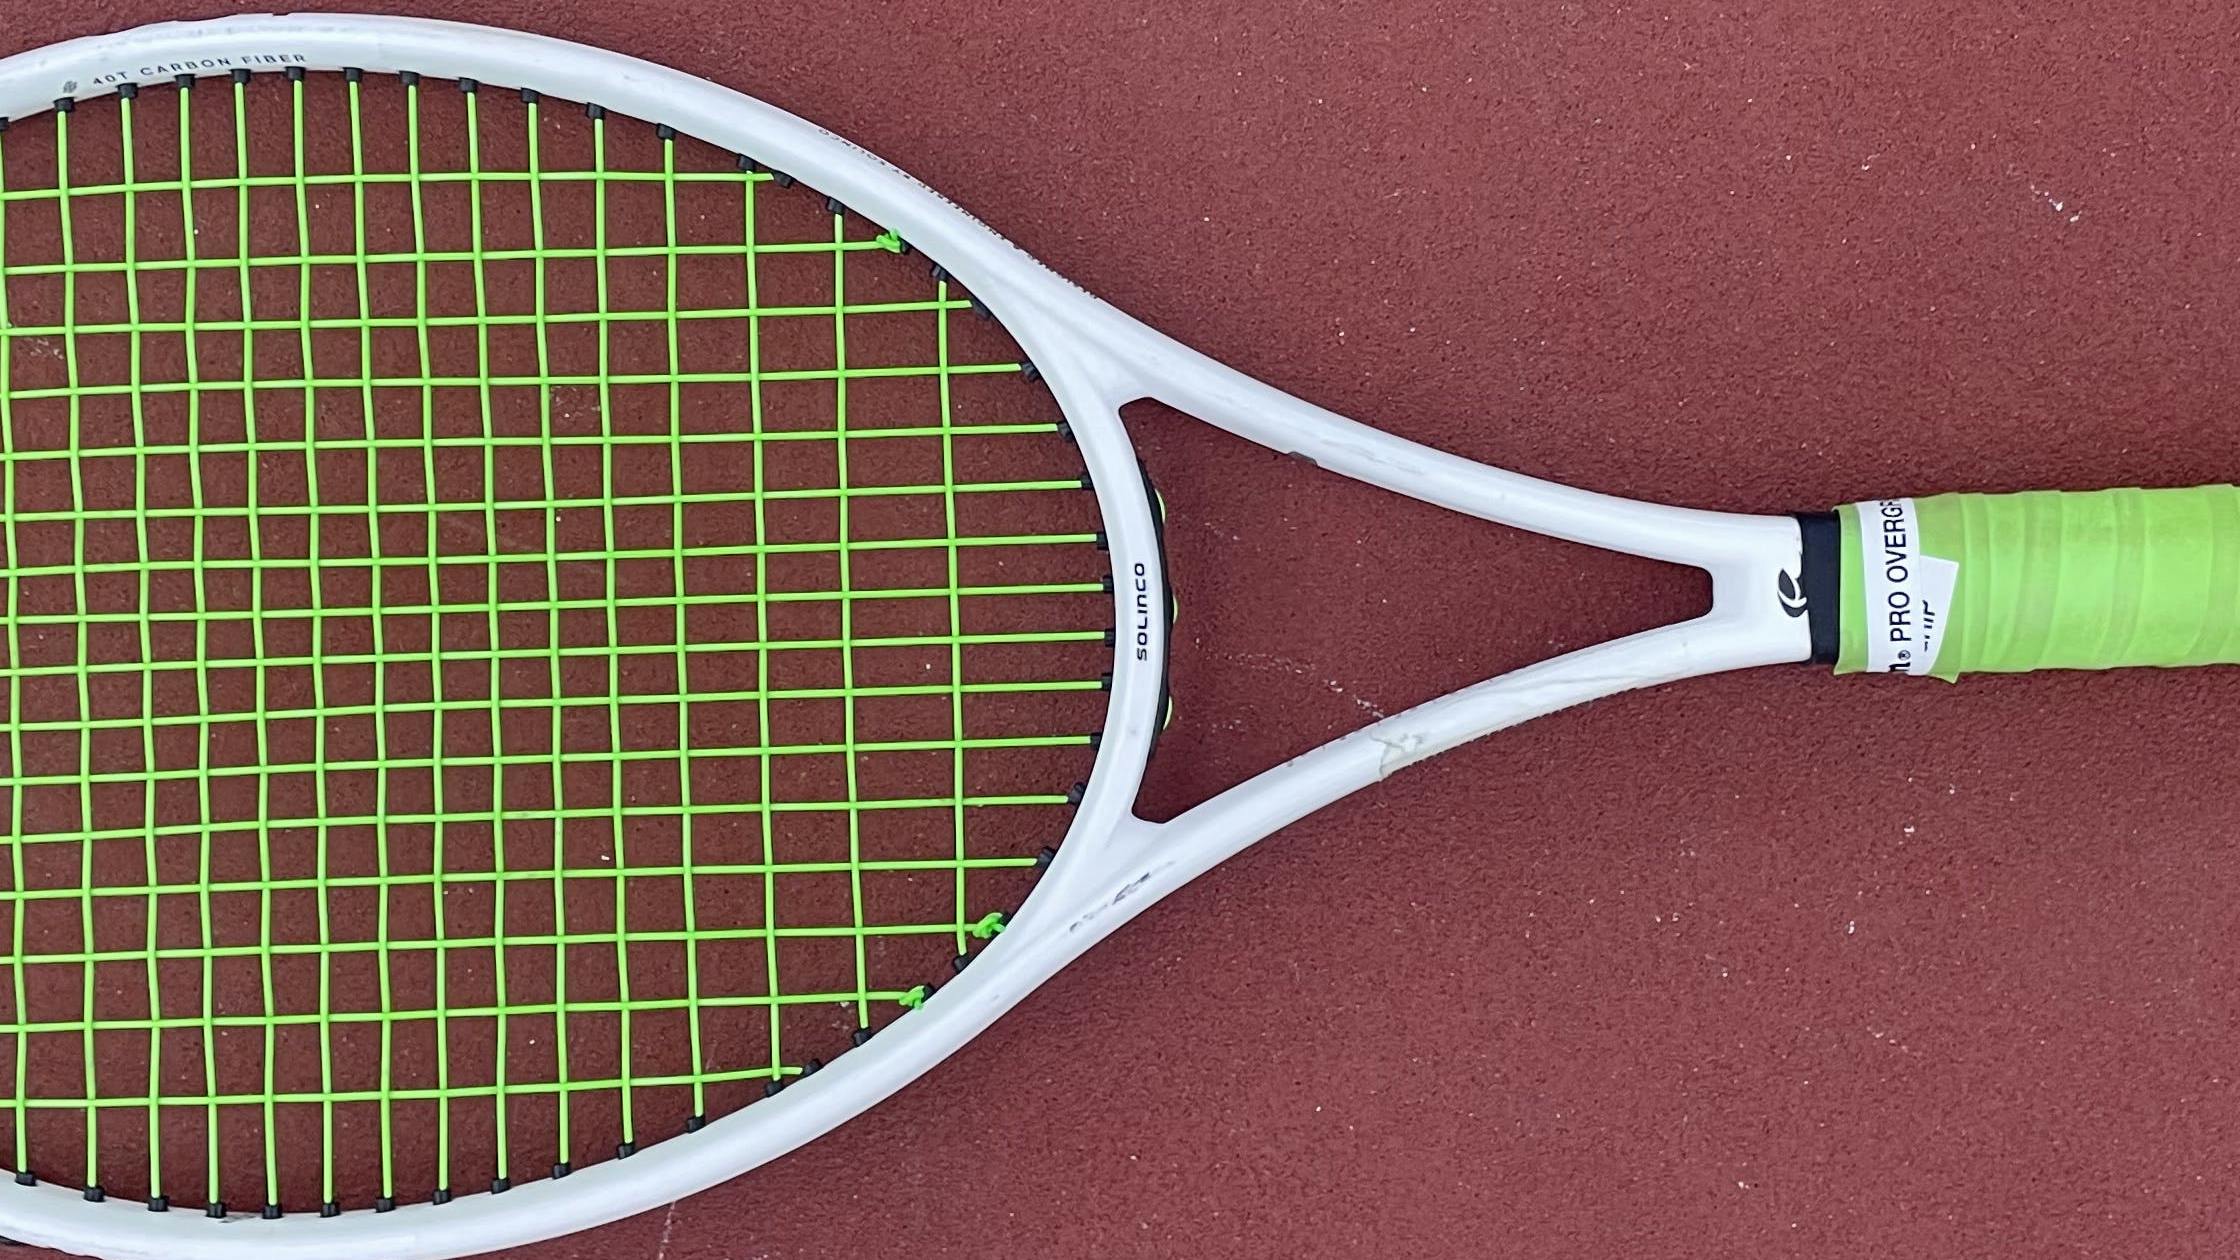 The Solinco Whiteout 305 (98) tennis racquet.